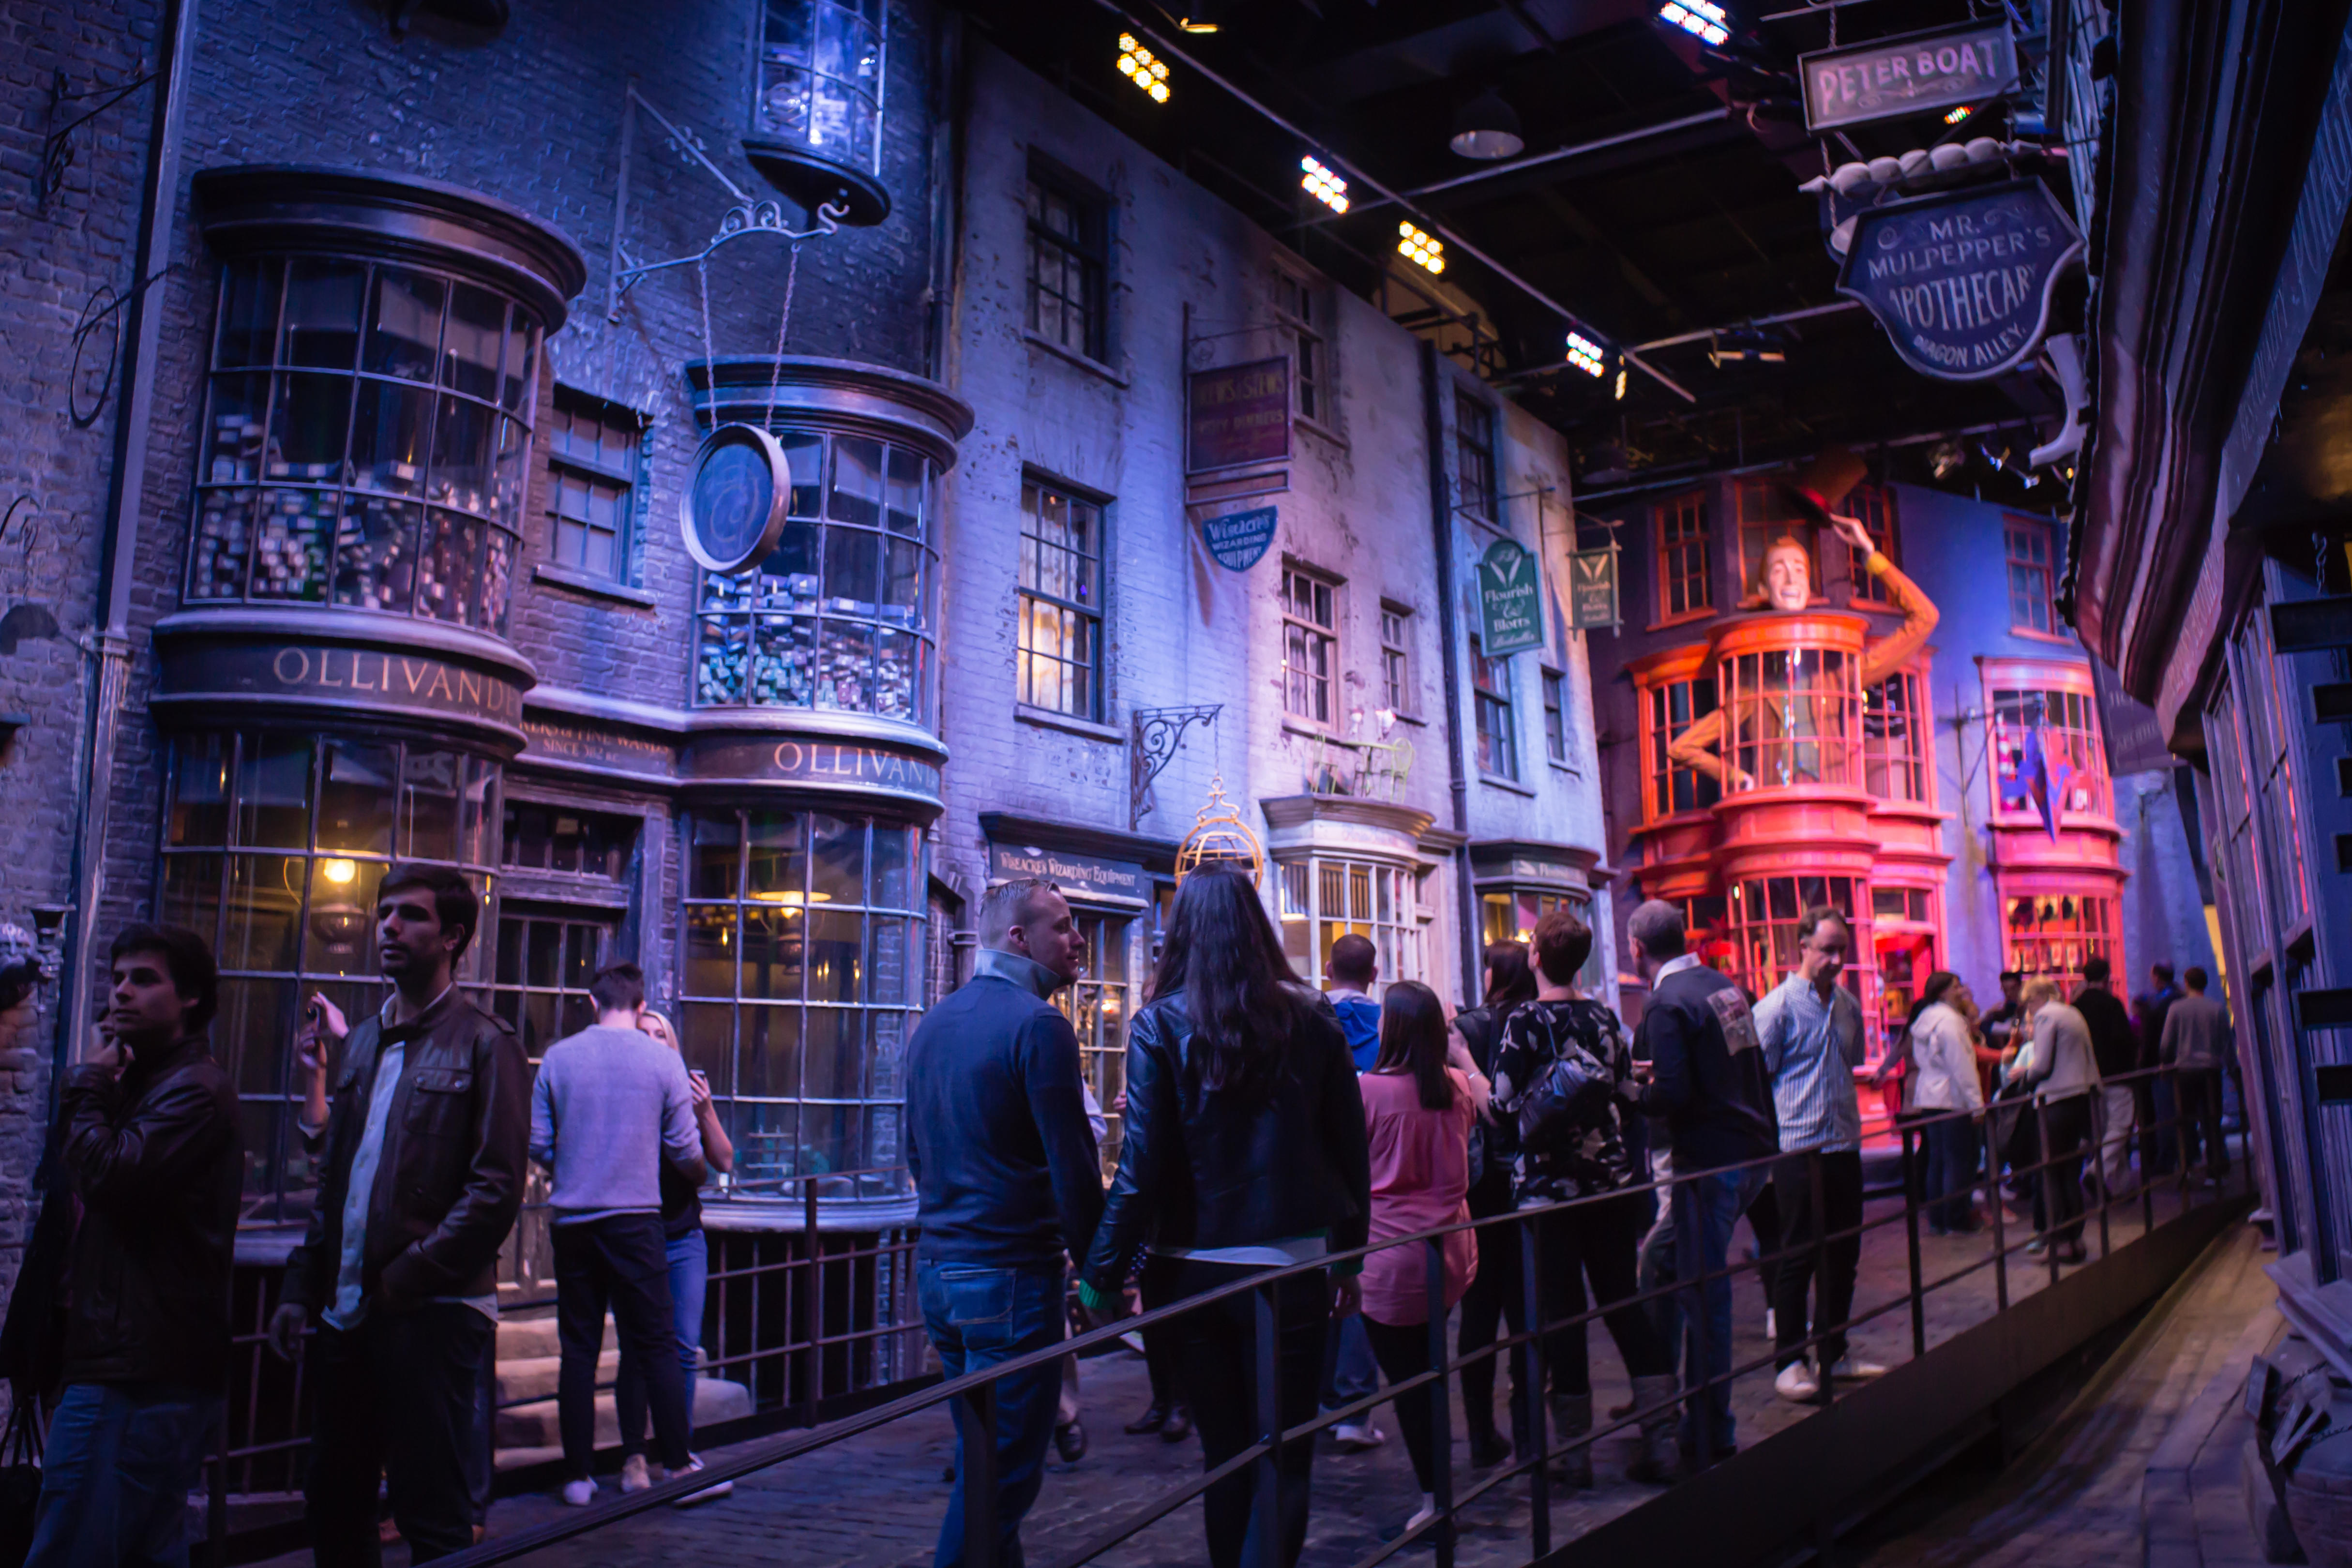 When I visited Diagon Alley, I was the only person on the cobbled street